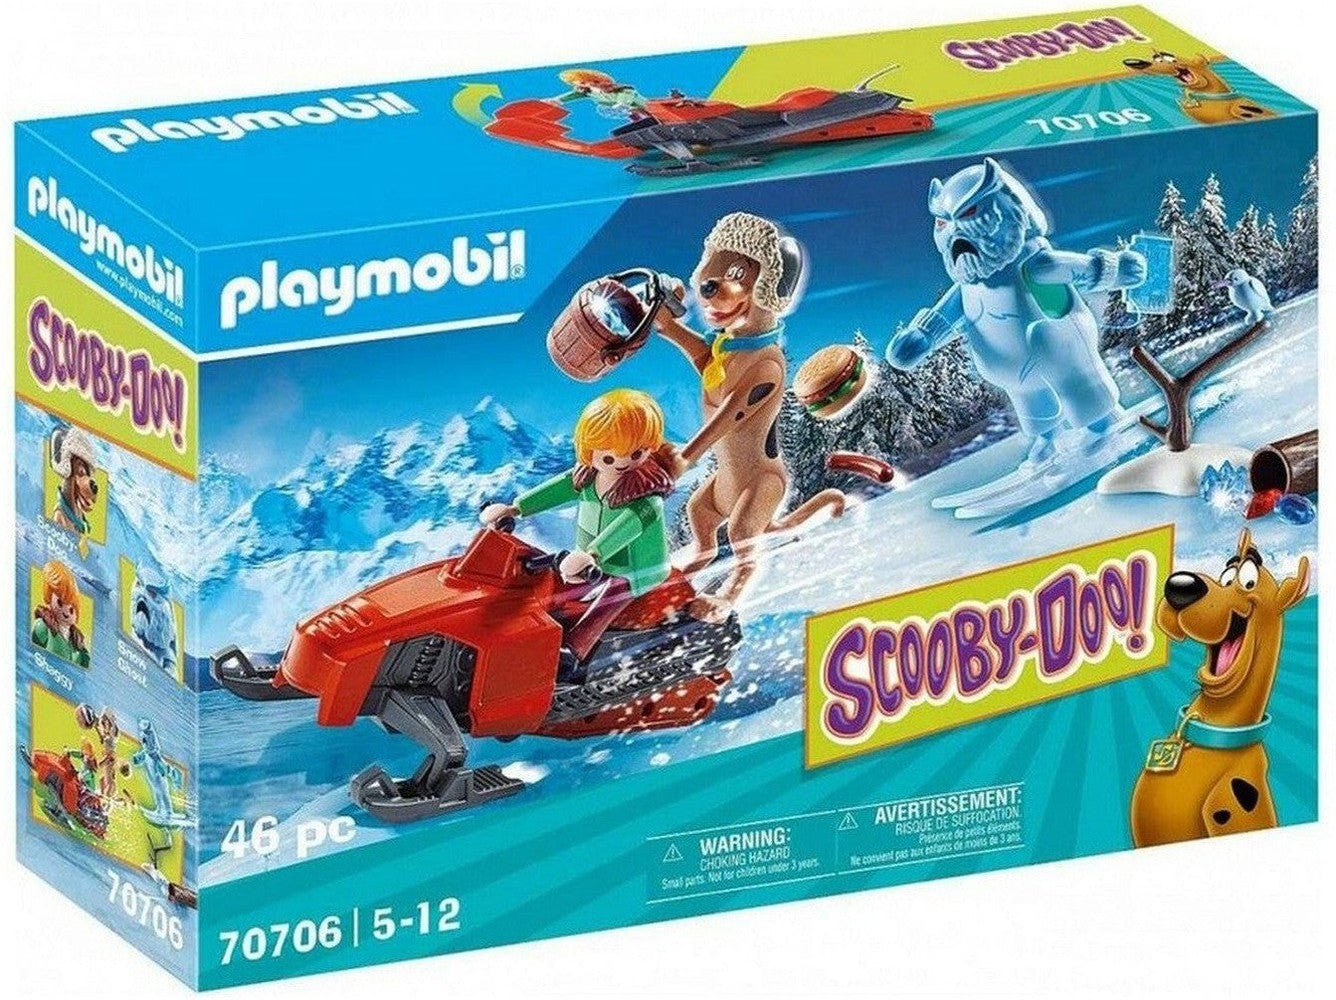 Playset Scooby Doo Adventure with Snow Ghost Playmobil 70706 (46 PC)